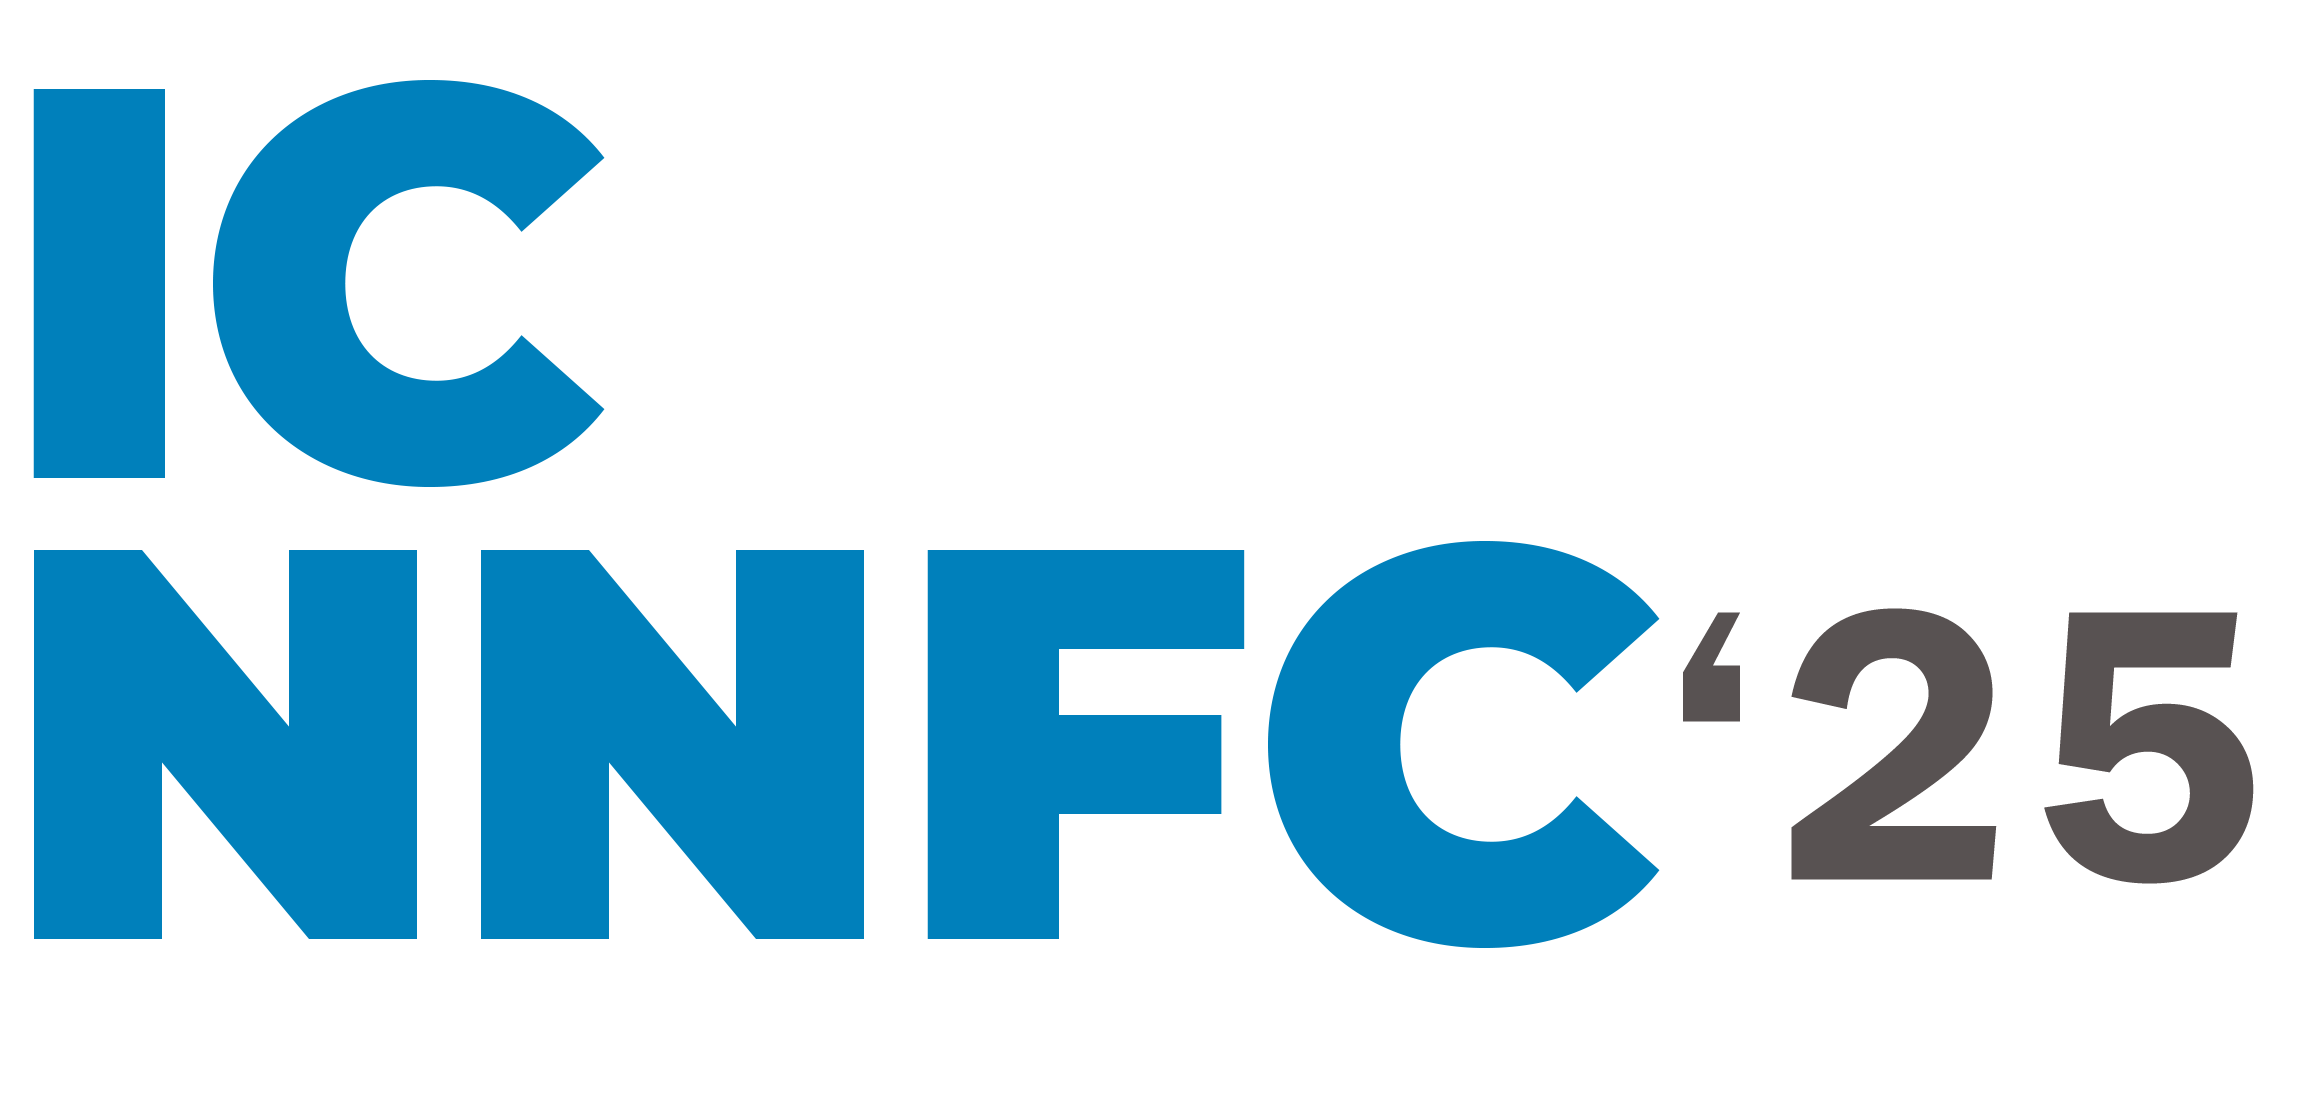 8th International Conference on Nanomaterials, Nanodevices, Fabrication and Characterization (ICNNFC 2025)